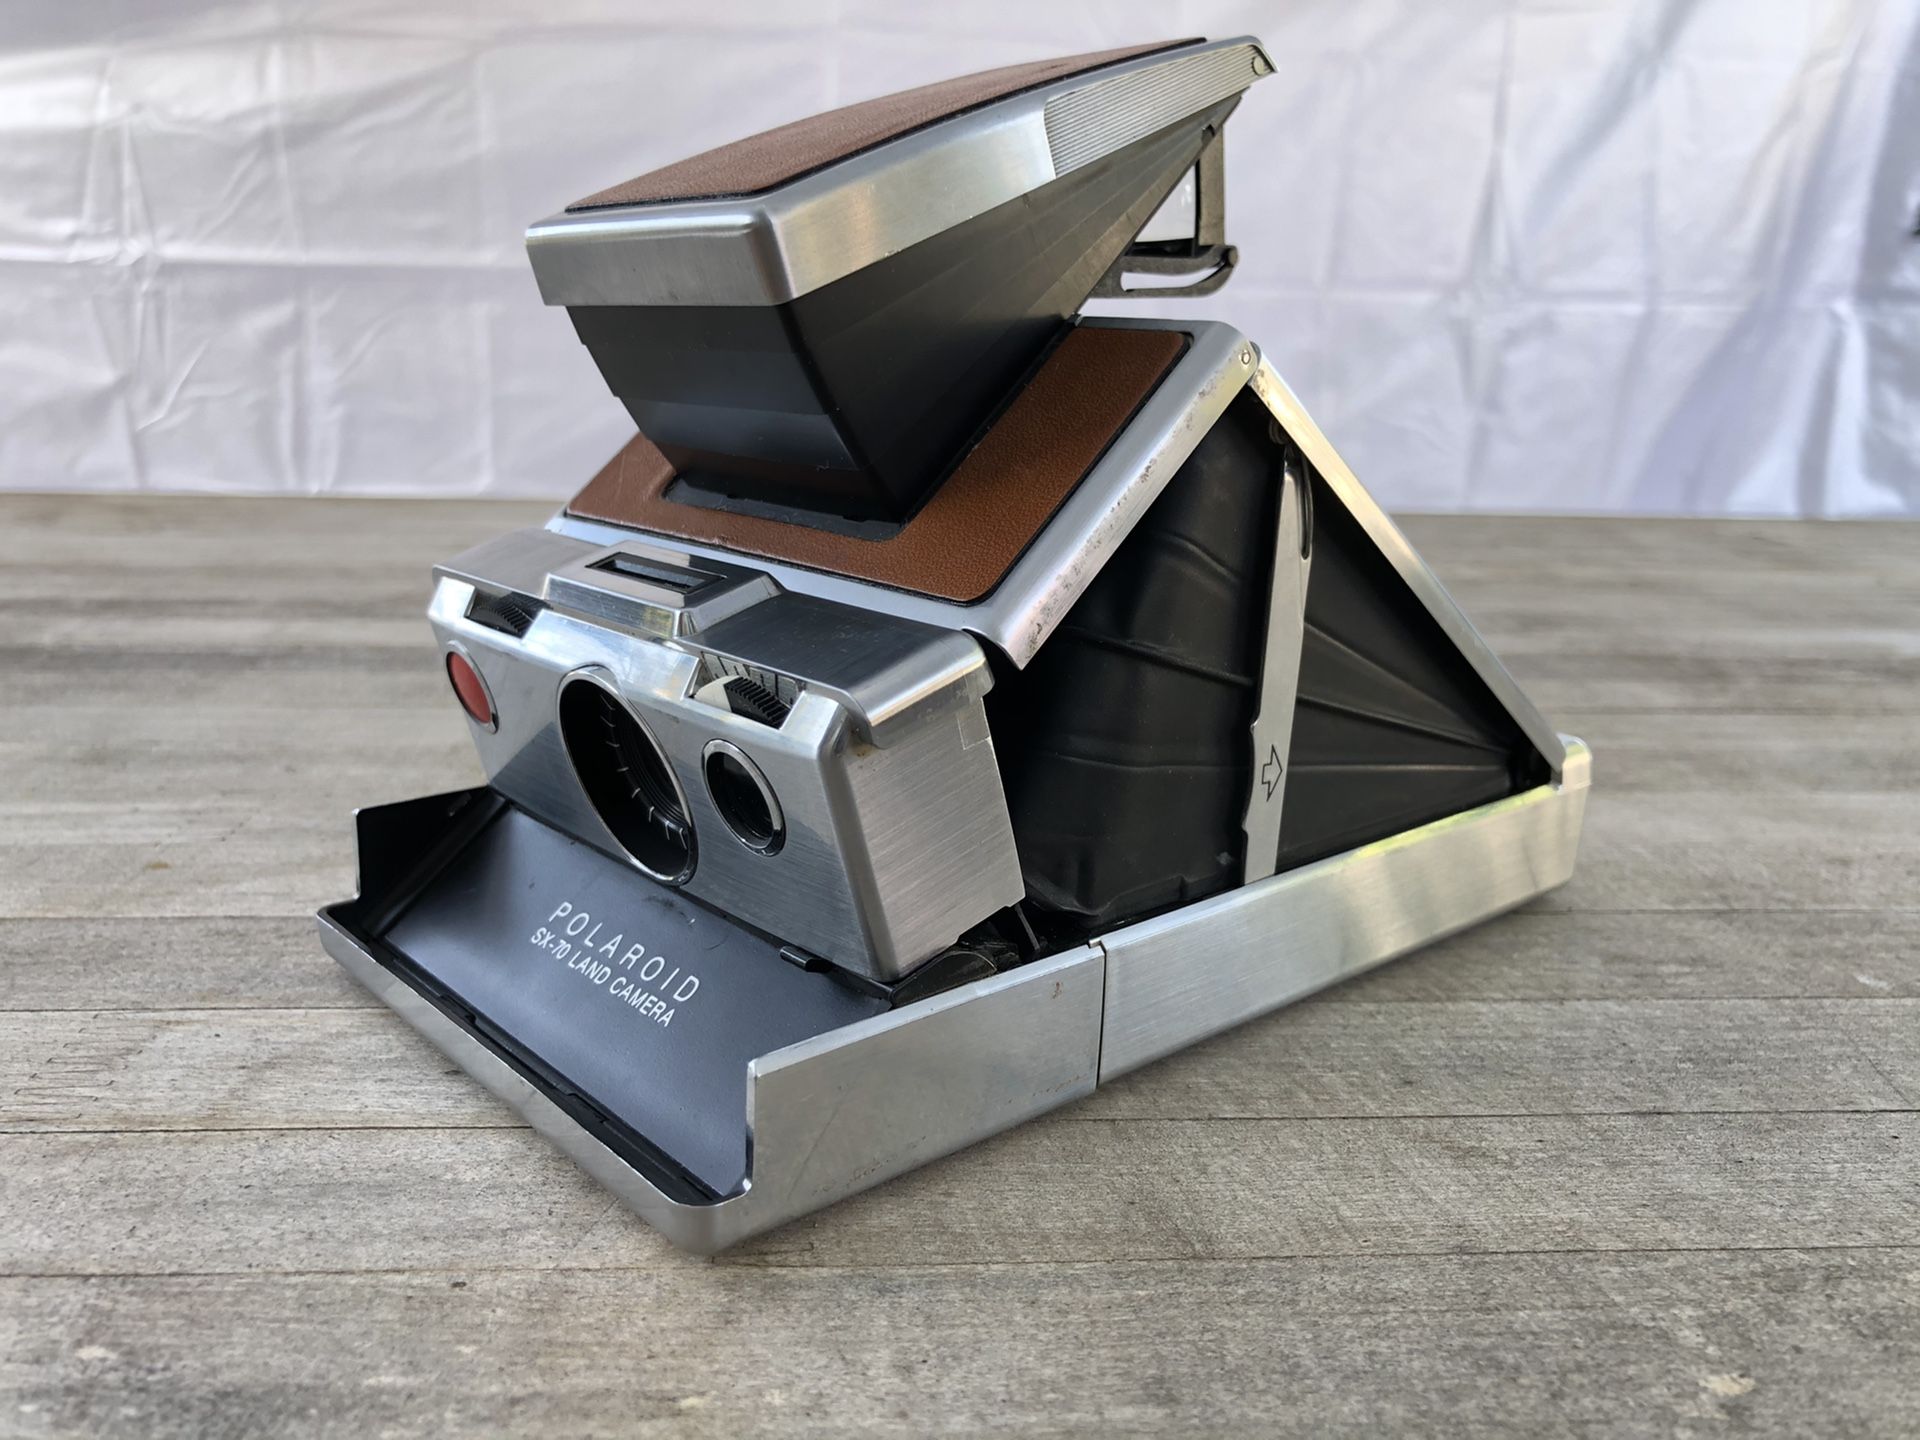 Polaroid SX-70 instant camera with leather case